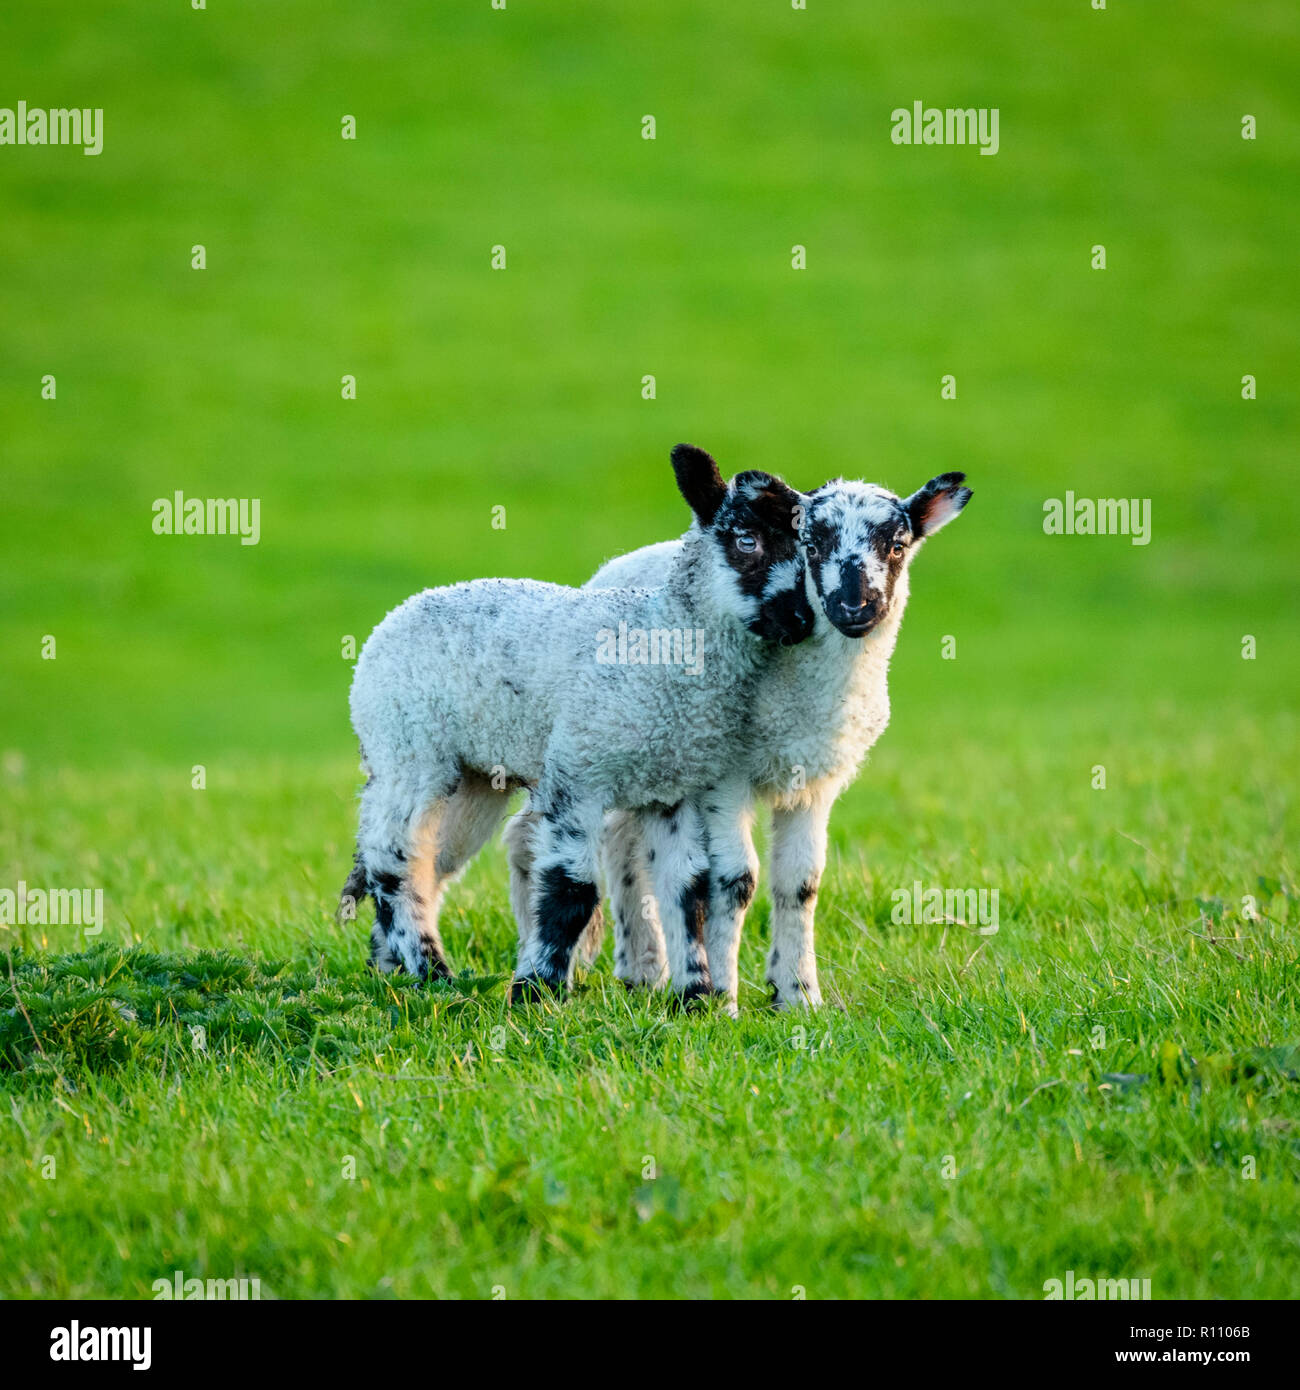 2 small cute lambs standing close together in farm field in springtime. One gently nuzzling its friend, 1 staring at camera. Yorkshire, England, UK. Stock Photo